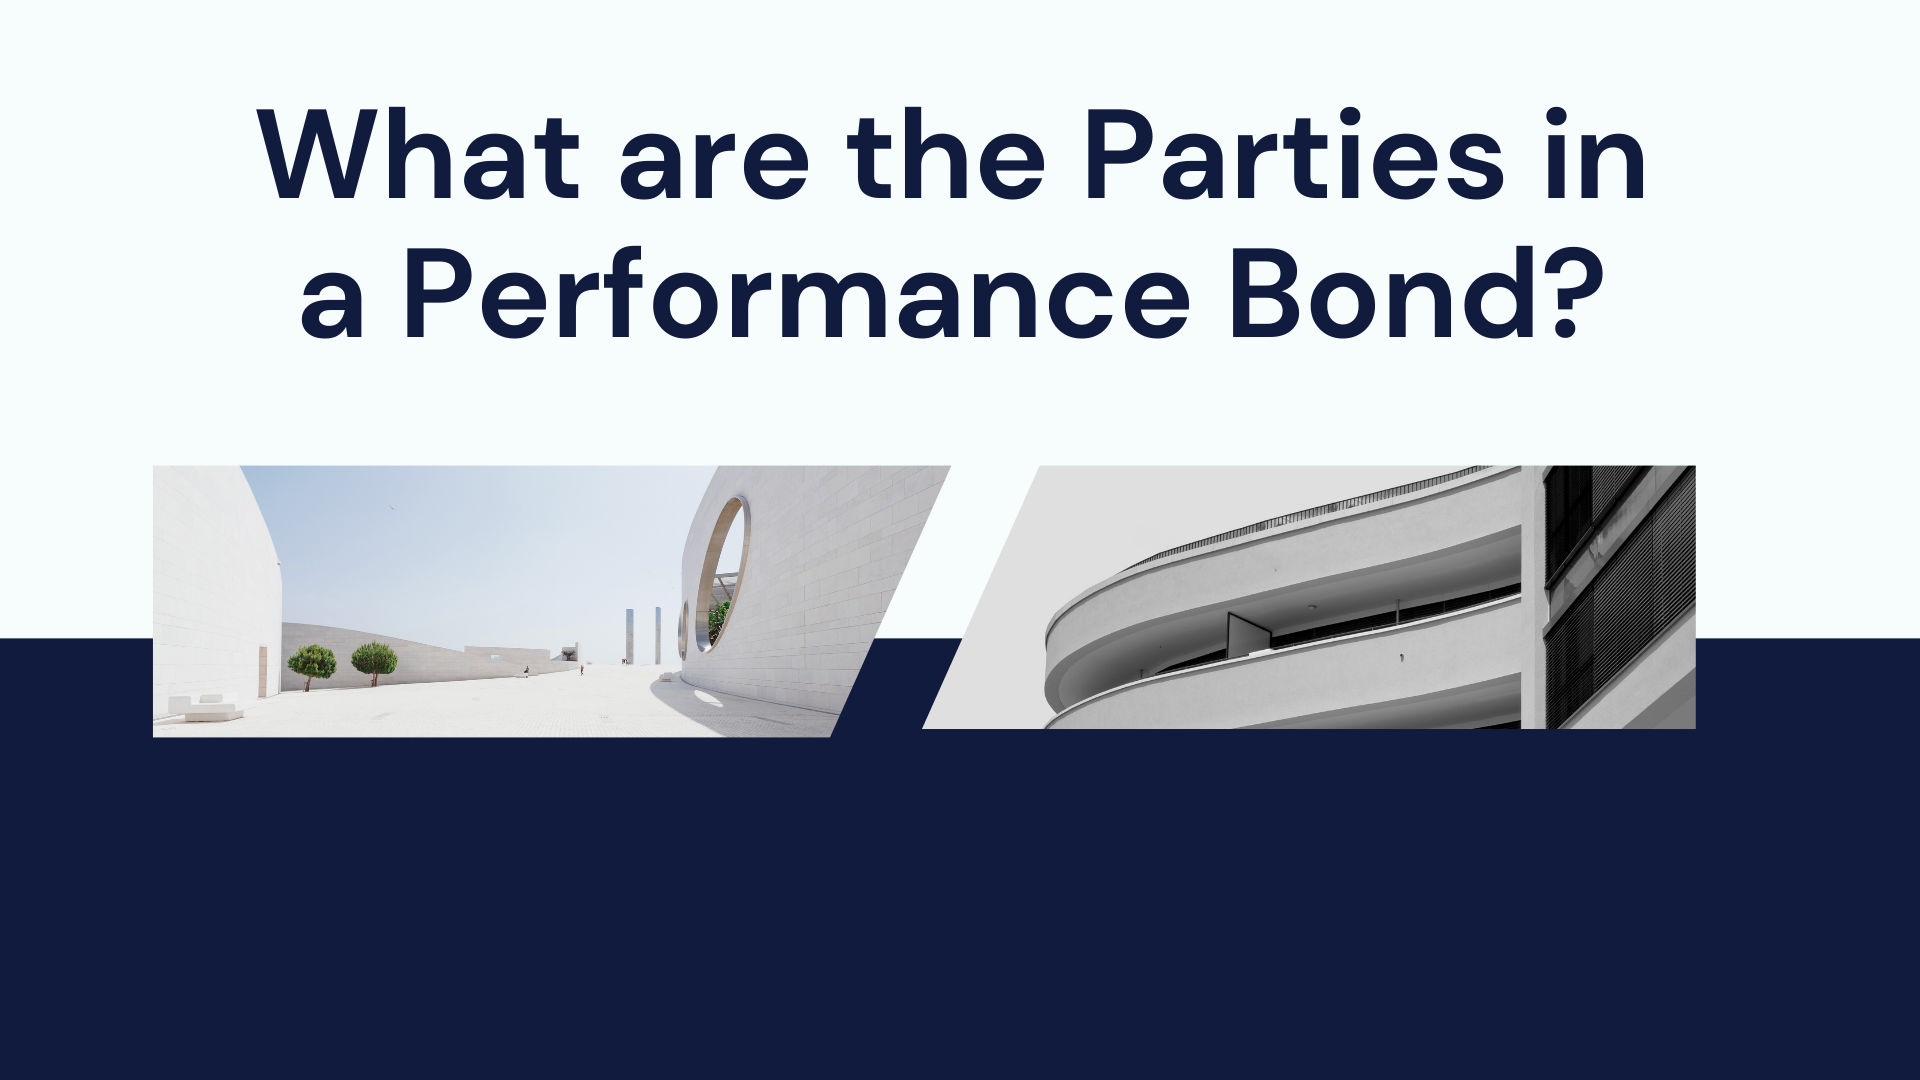 performance bond - What party to a performance bond owes the contract’s responsibility - building